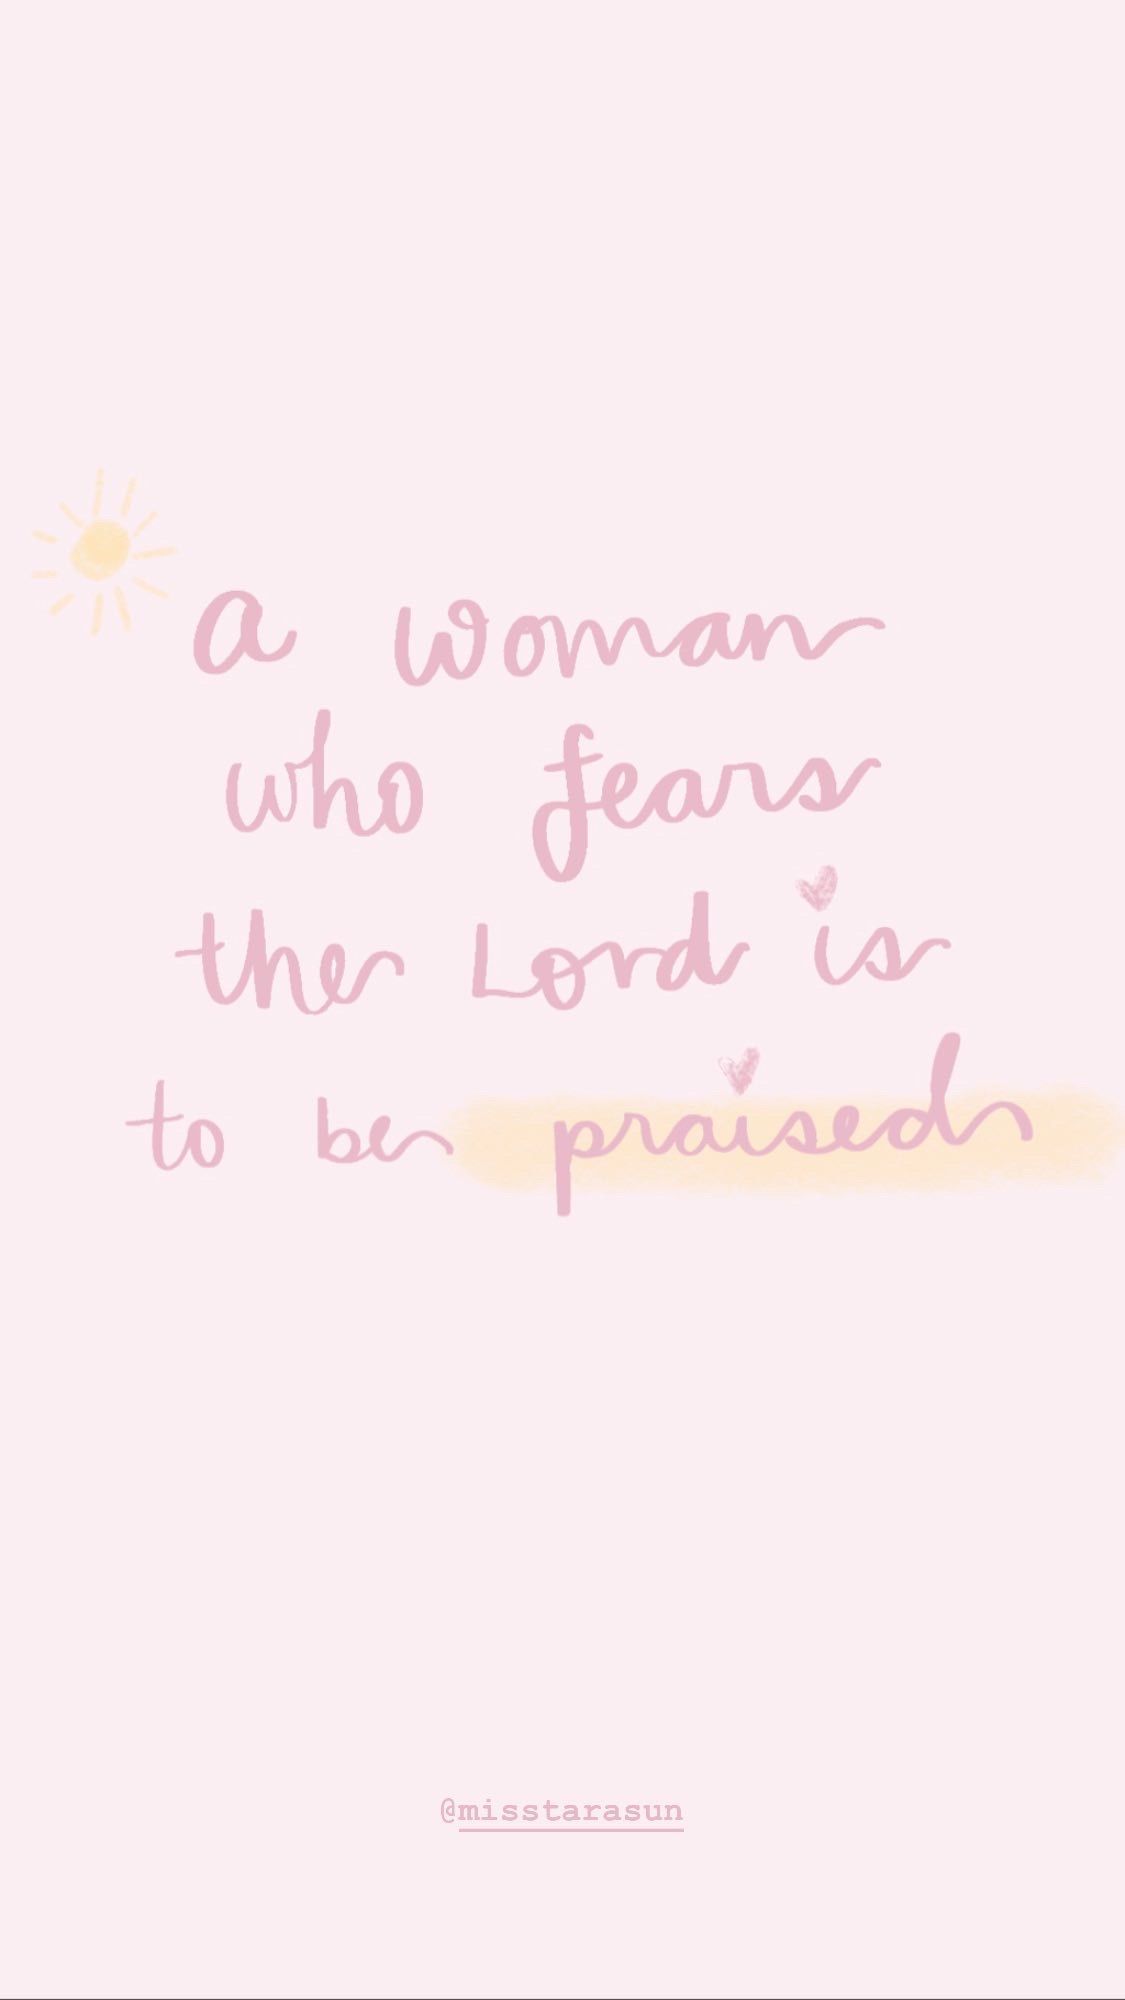 Proverbs 31 Woman. Proverbs 31 woman quotes, Christian verses, Best bible quotes